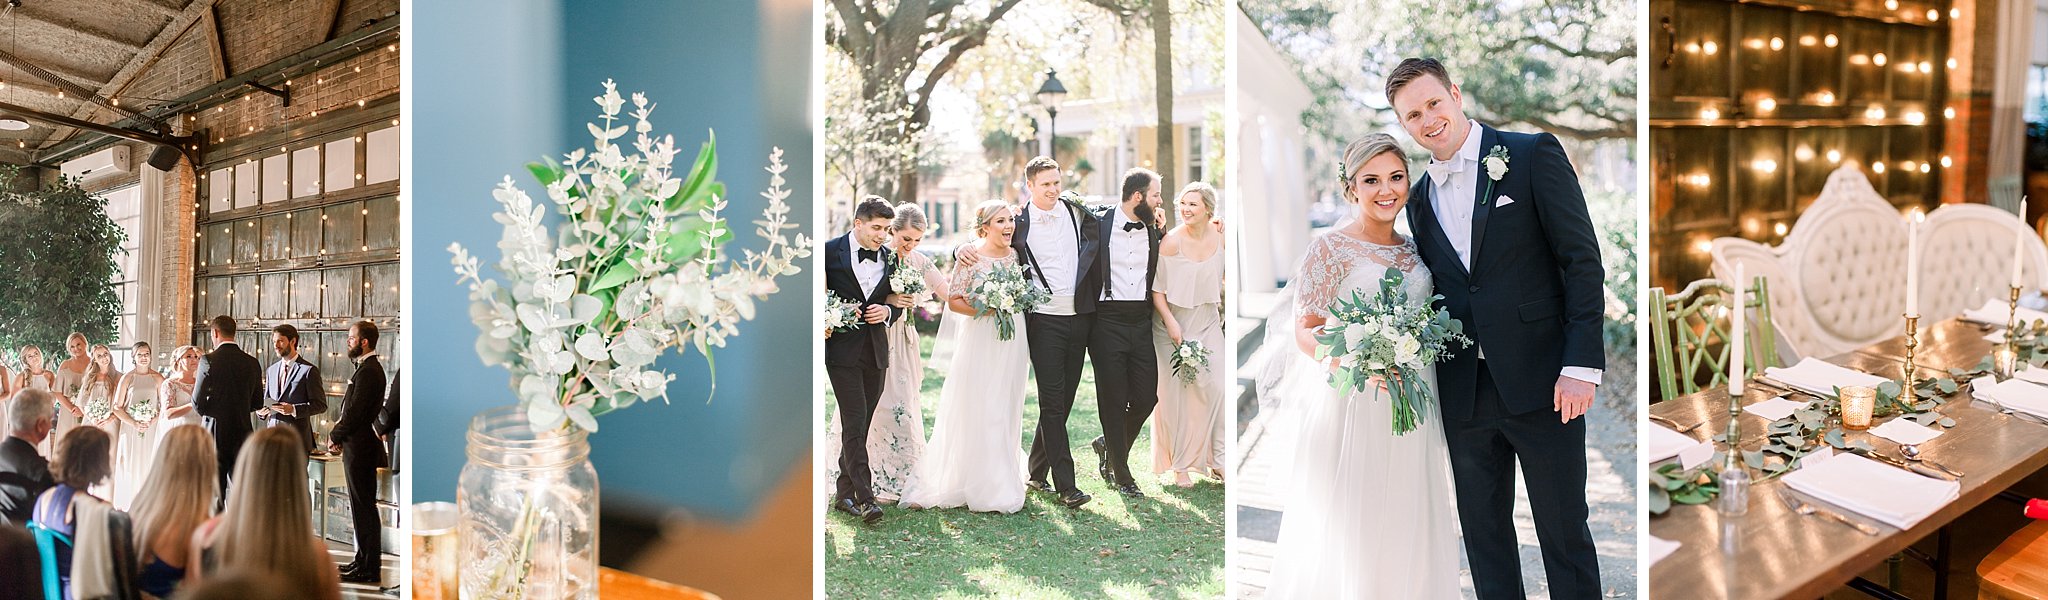 Soho South Wedding with portraits in Forsyth Park